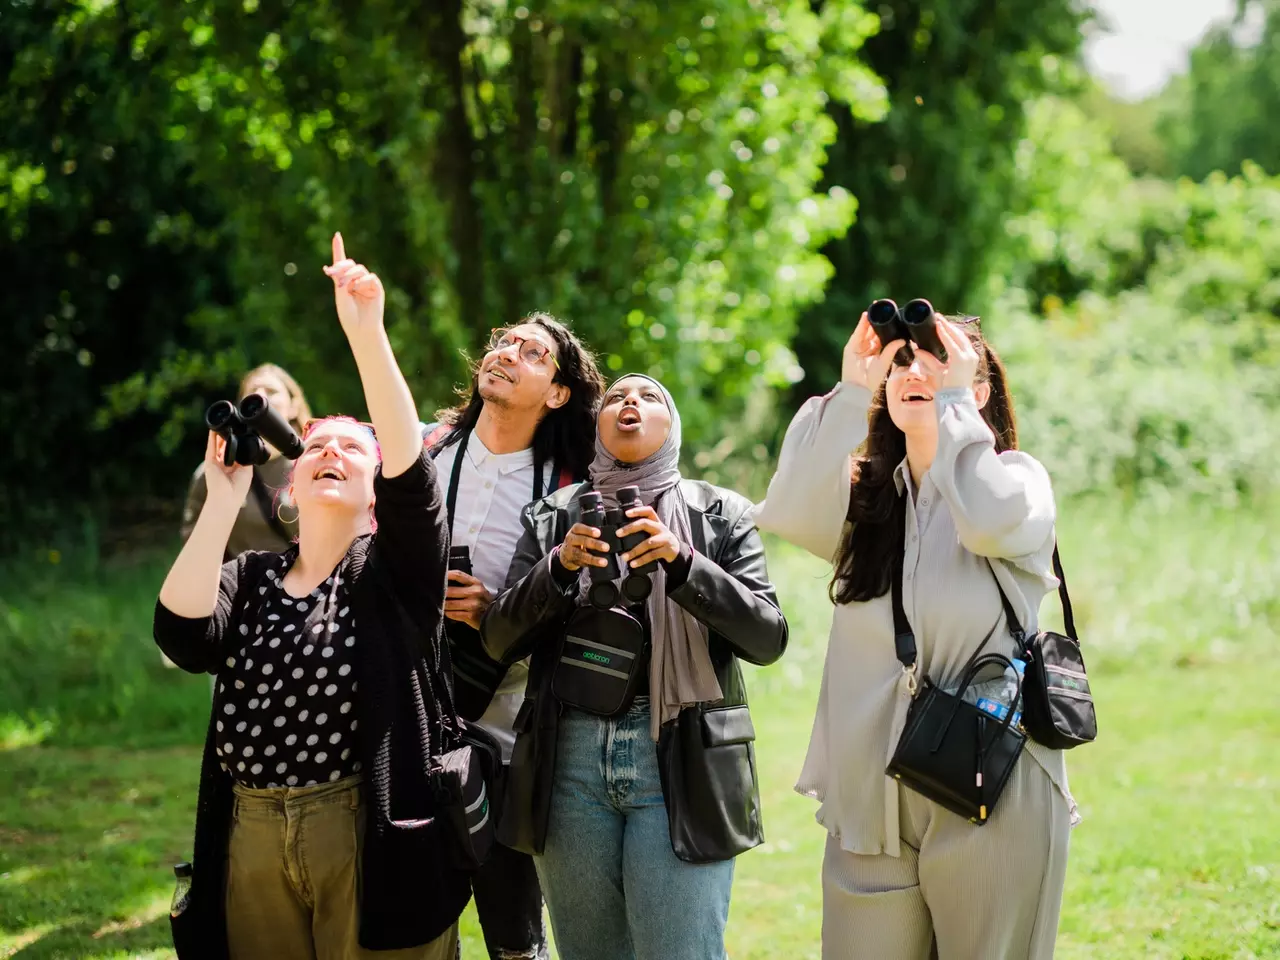 Group of male and female adults watching wildlife in park with binoculars